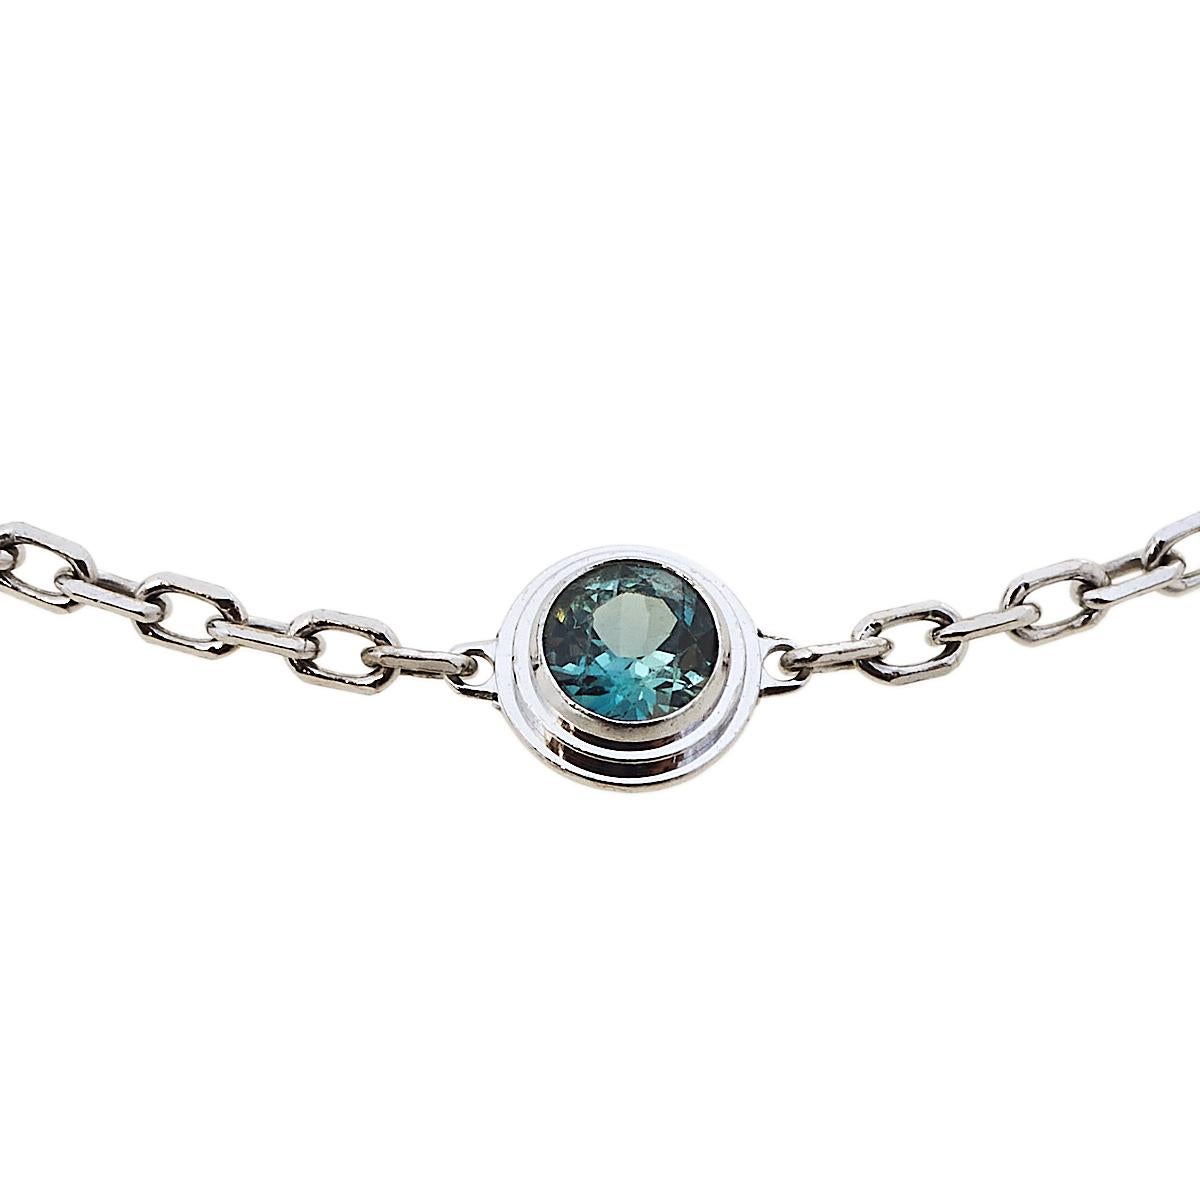 Simple is the new elegant and this bracelet from Cartier is a clear example of the same. The 18k white gold chain bracelet is centered with a green sapphire and finished with an adjustable lobster clasp. This understated piece is effortlessly